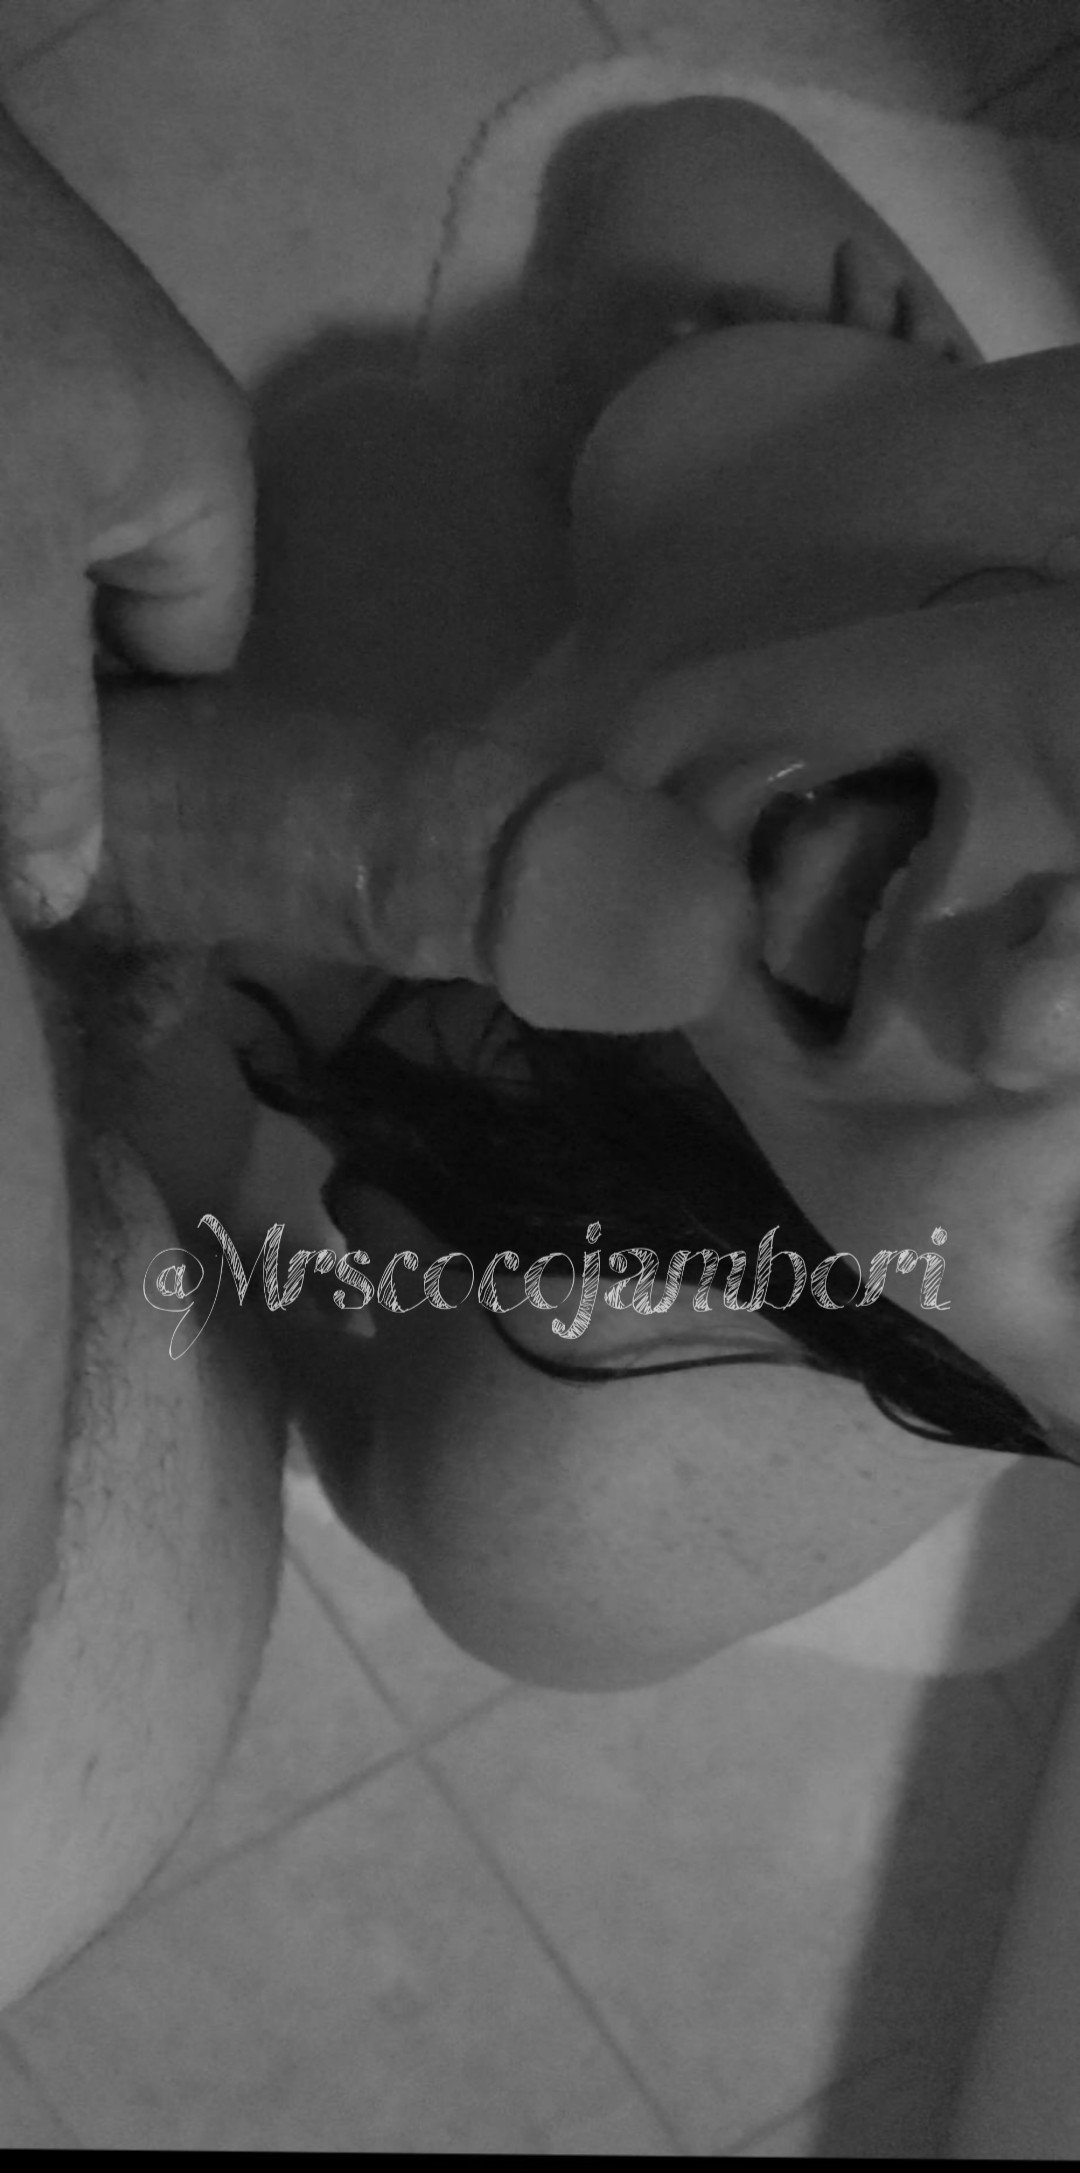 Watch the Photo by Mrscocojambori with the username @Mrscocojambori, posted on July 13, 2020. The post is about the topic blowjob. and the text says 'Another lucky winner from the list. Just a naked blowjob and swallow, for the 'runner up' 😊 and a chance to watch me and hubby in the room. 
Maybe just a handjob for the 3rd place🤔?
Who's the lucky person?
#malaycouple #realcouple #notmyhusband..'